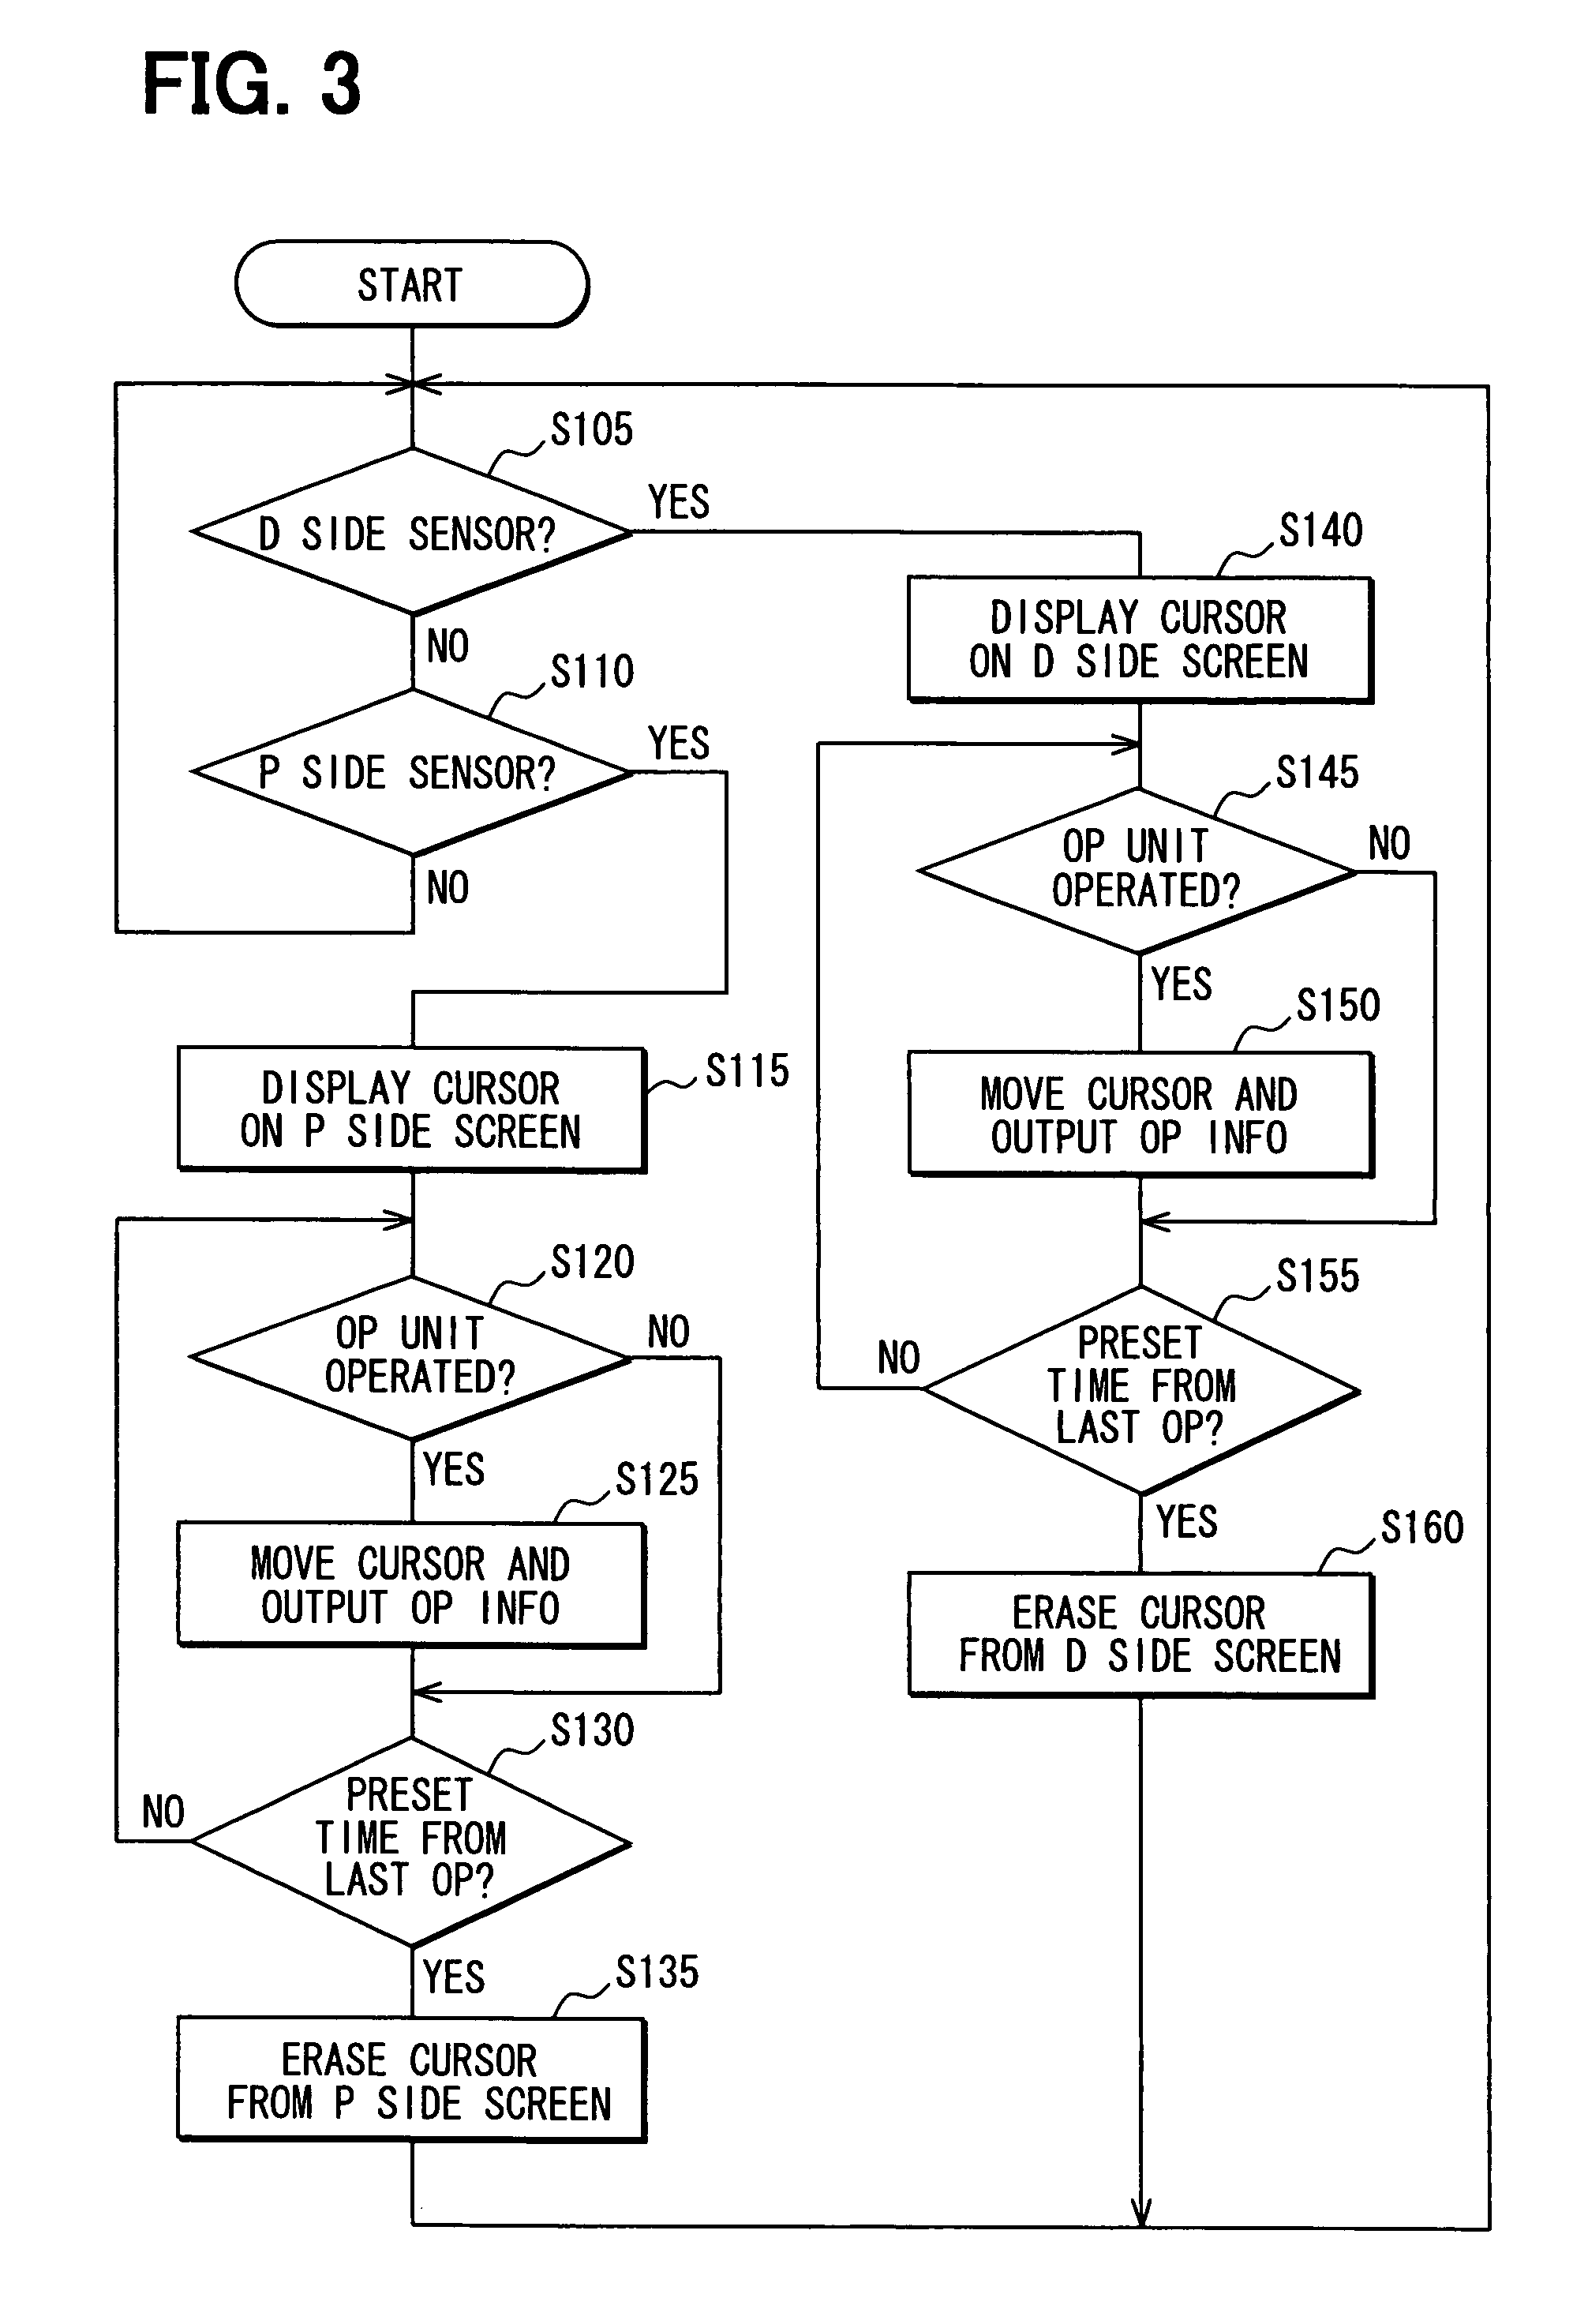 Operation system with right seat or left seat operator determination